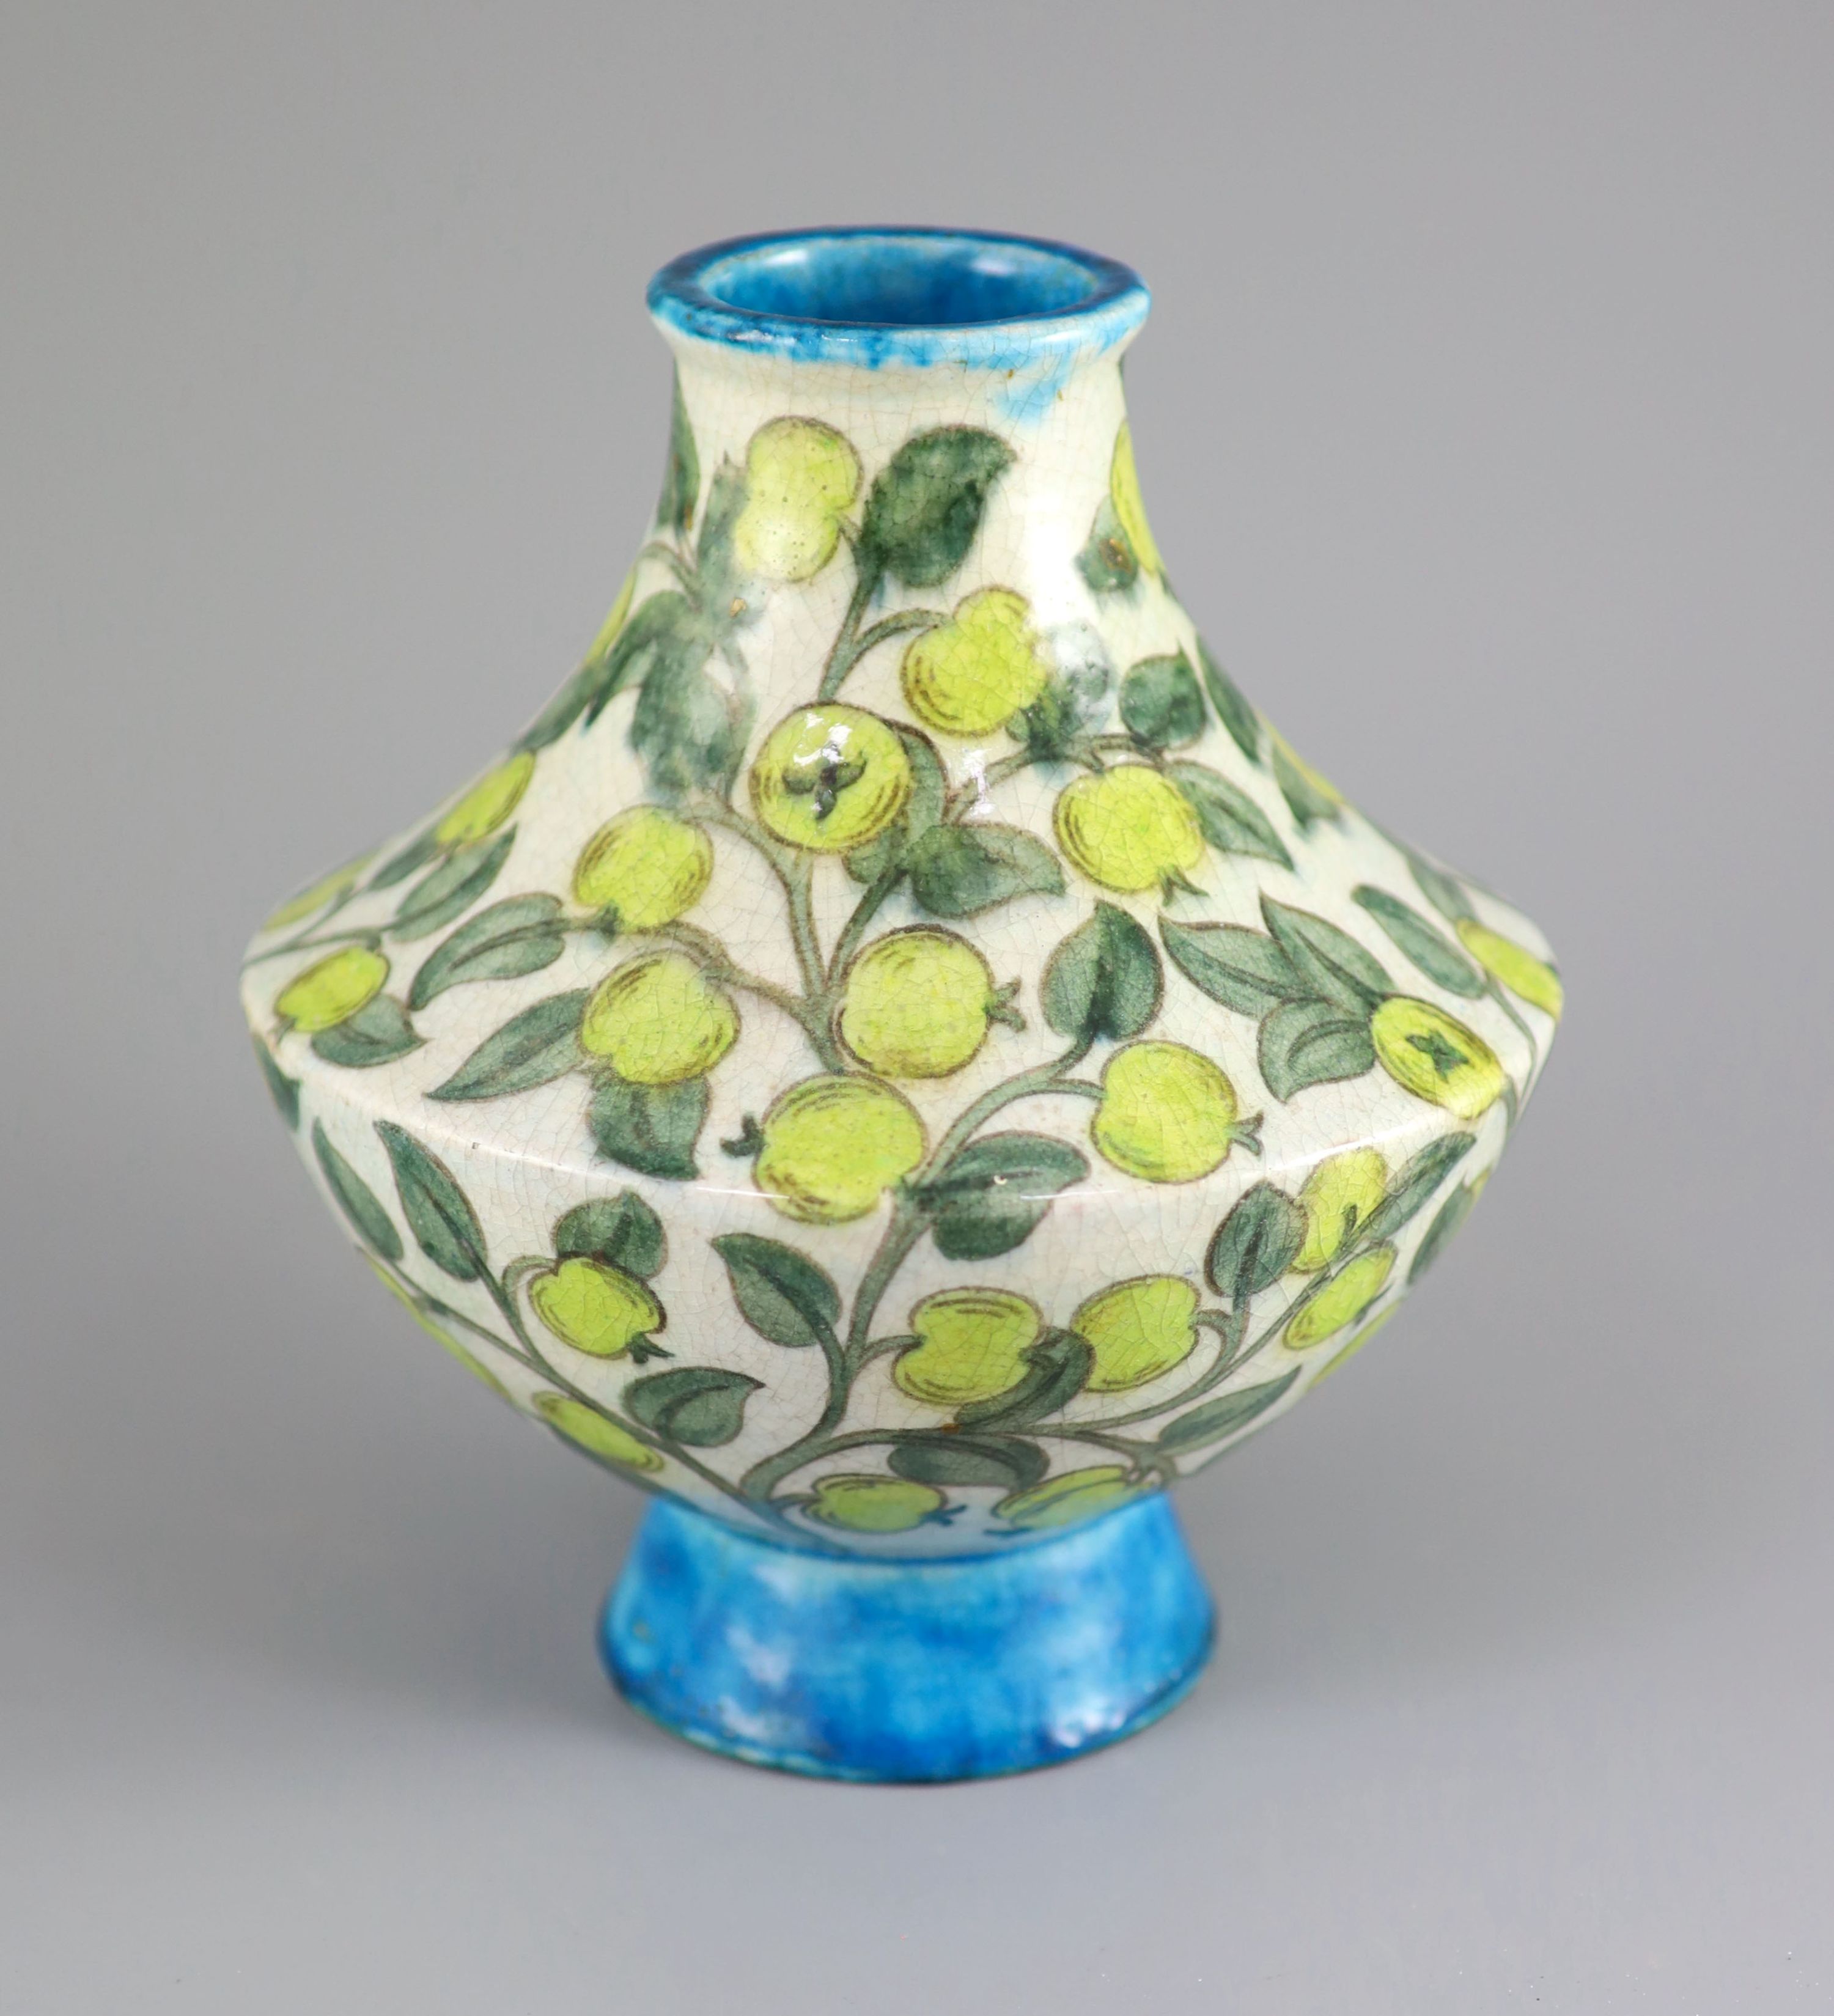 A William de Morgan tin glazed earthenware vase, early Fulham period, c.1890, 20cm high, small foot chips